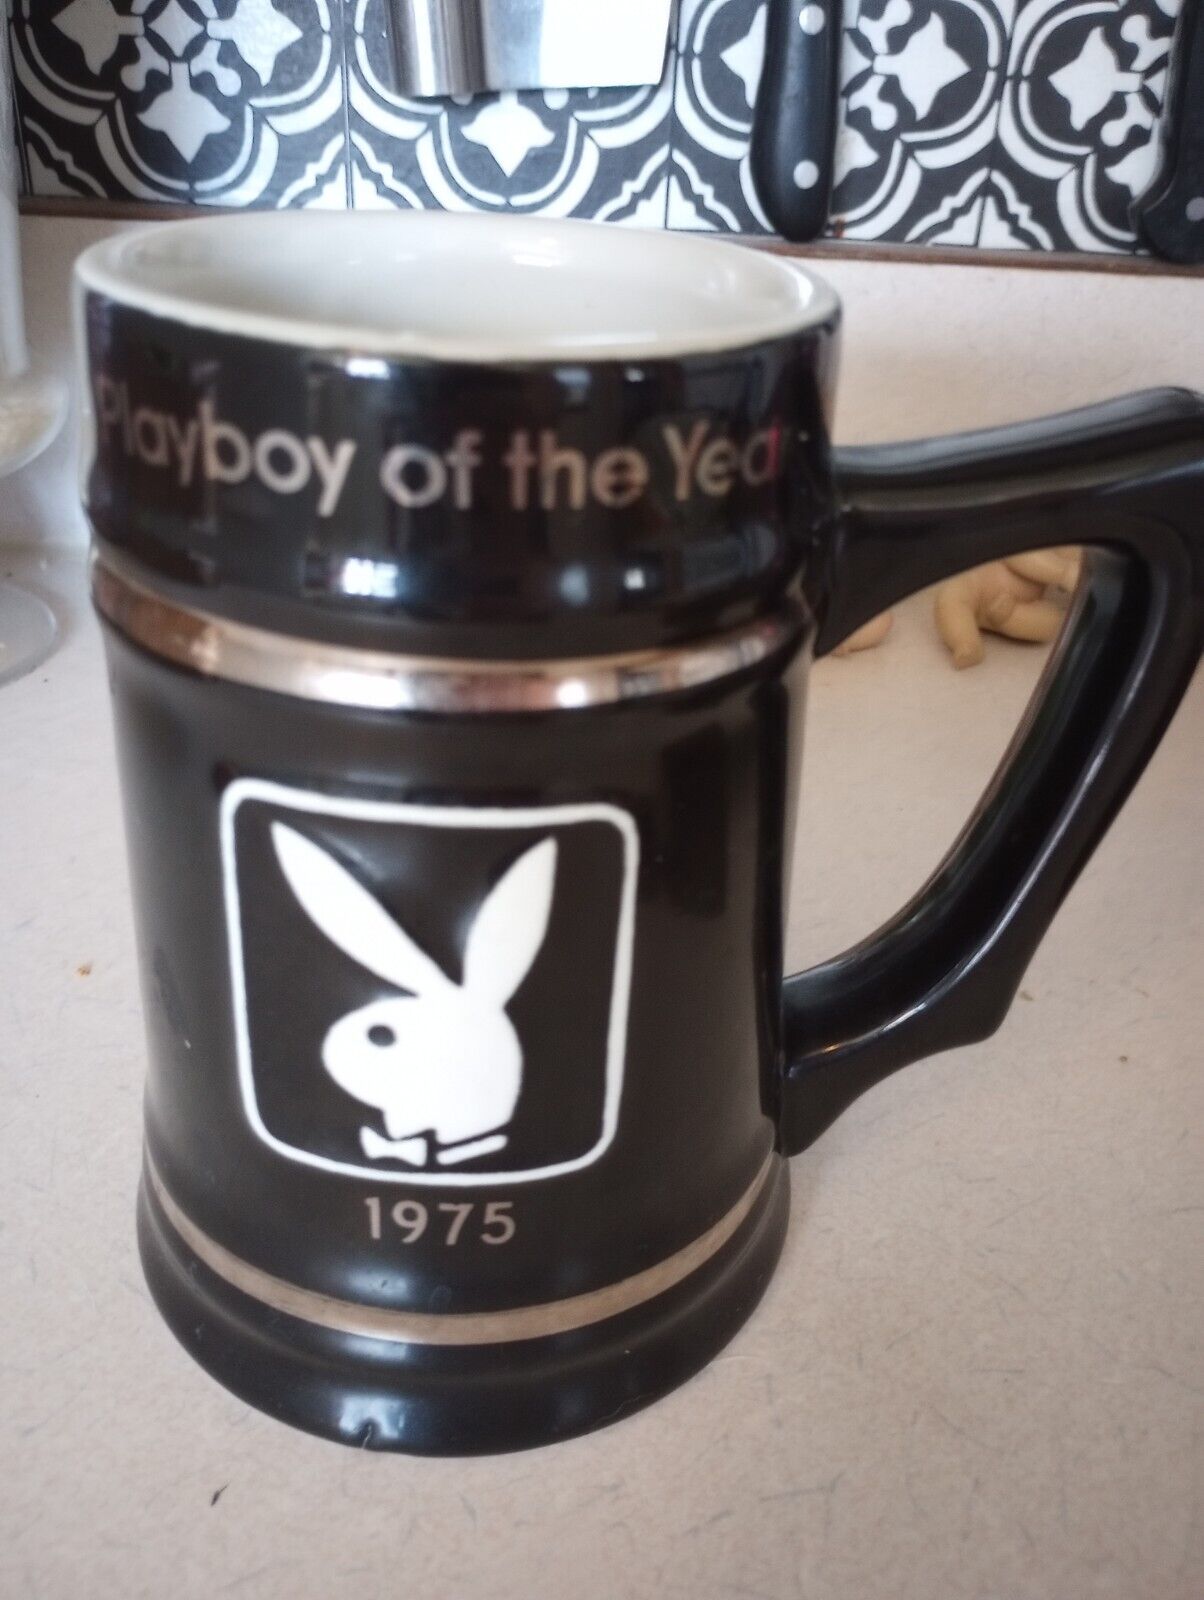 VINTAGE PLAYBOY PLAYBOY OF THE YEAR 1975 MUG Cup RARE COLLECTIBLE DRINKWARE